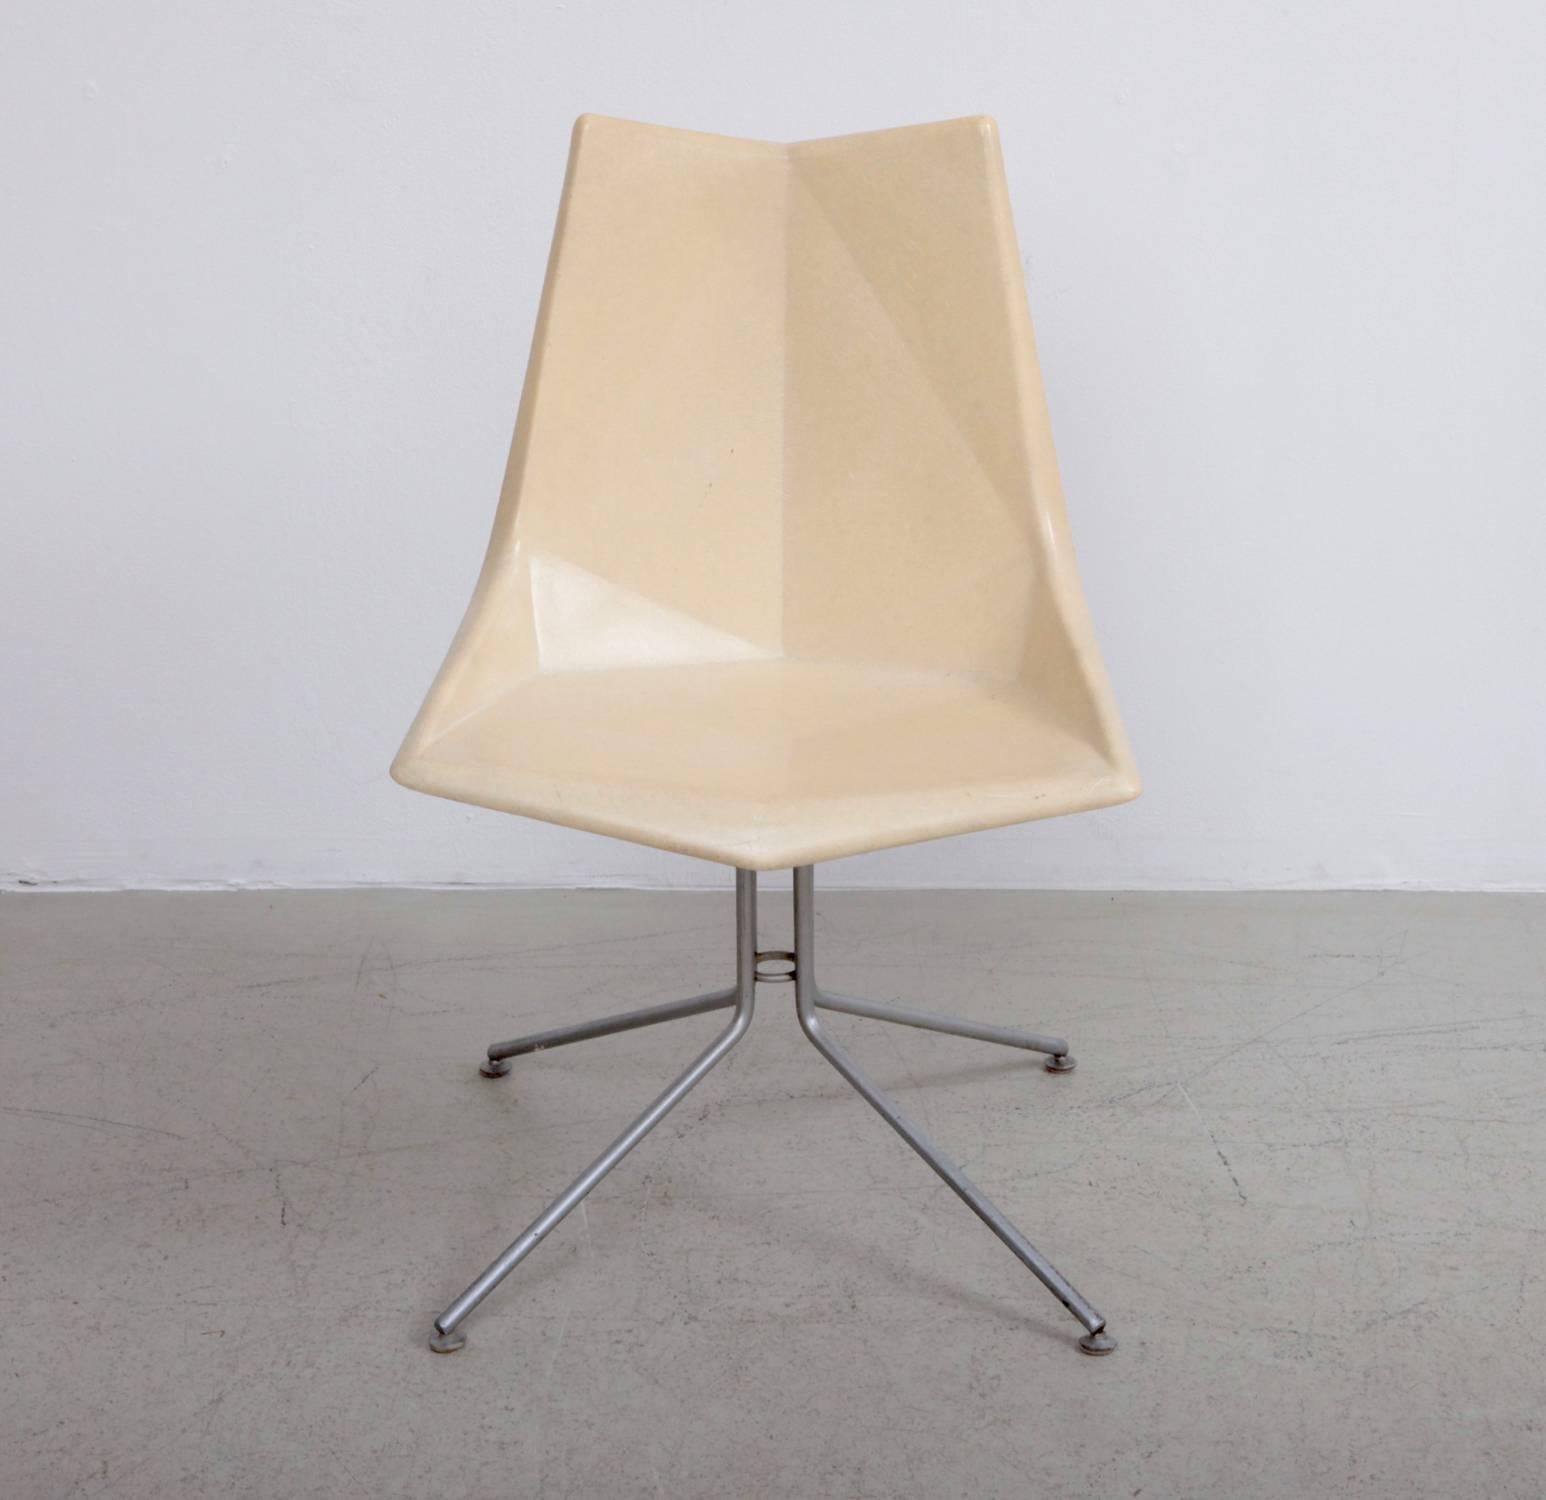 Extremely rare versions of the Paul McCobb Origami chair for St. John Seating. The fiberglass seat is molded at angles, reminiscent of the Japanese origami technique. The chair stands on tubular iron legs.

